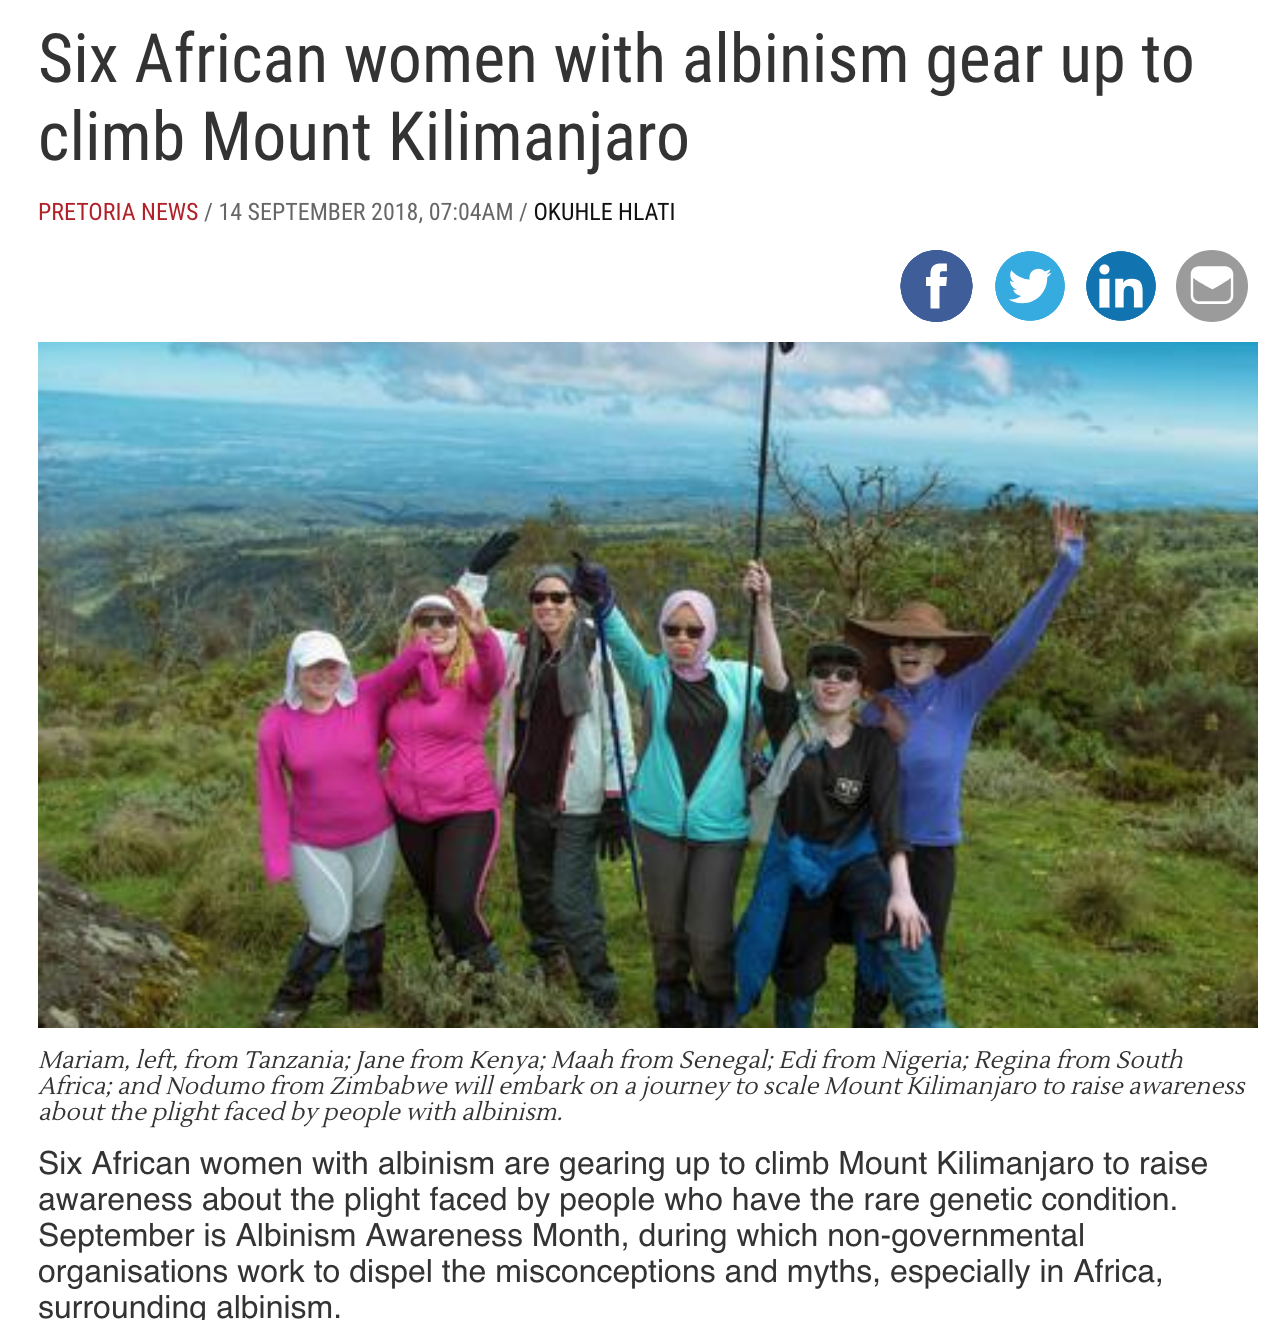 SIX African women with albinism gear up to climb Mount Kilimanjaro